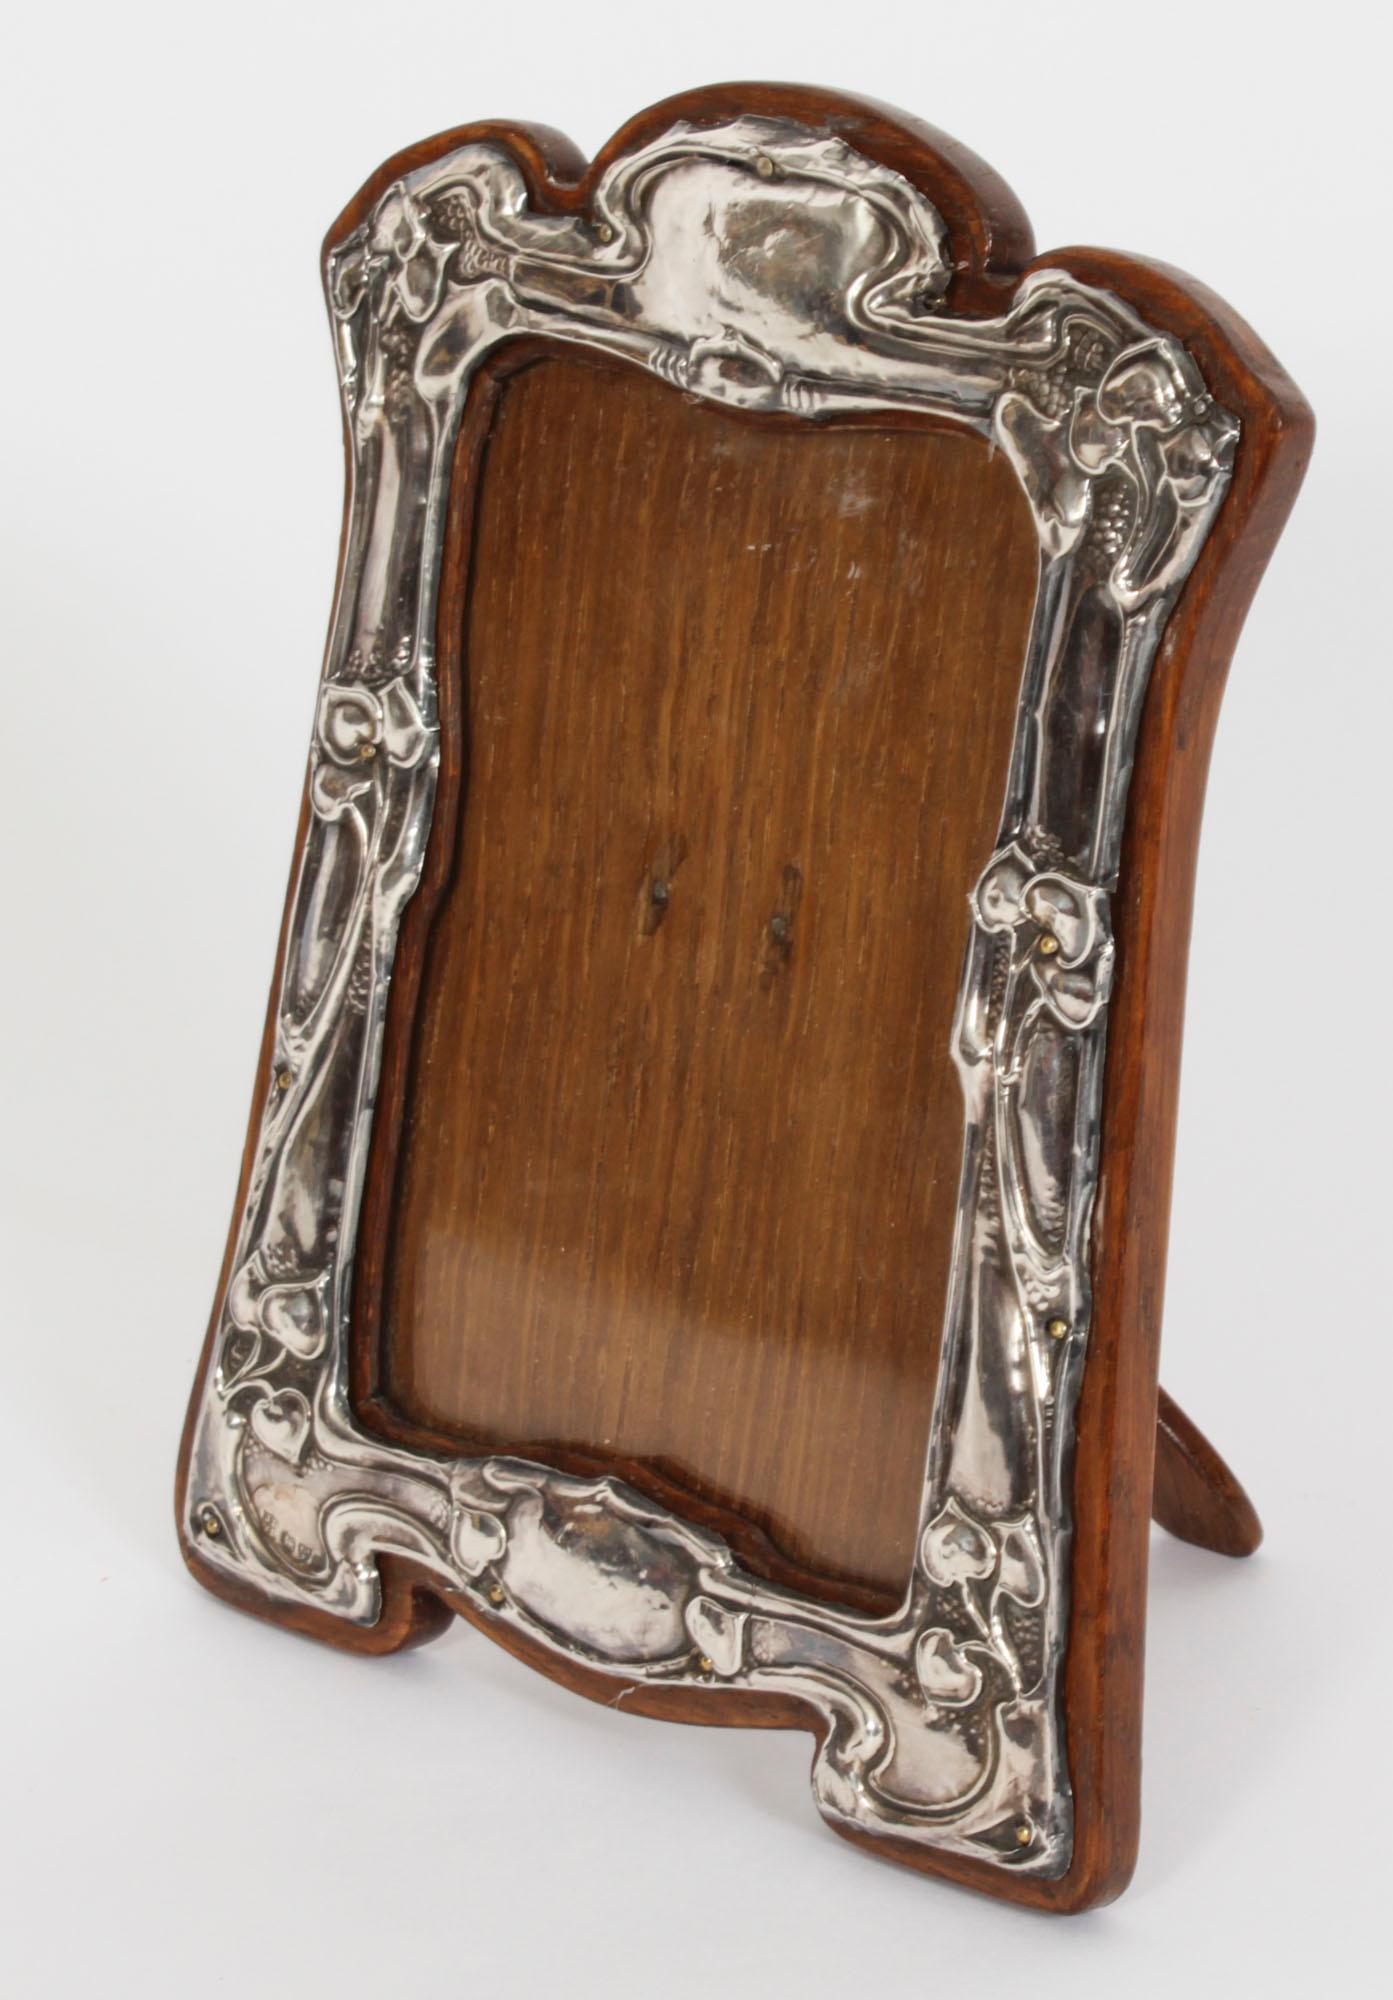 A superb Art Nouveau sterling silver photograph frame by James Deakin & Sons, Chester, 1905

Beautifully portrait  frame decorated with relief floral, foliate and scroll decoration having extensive cut decoration, plain cartouche and polished  oak